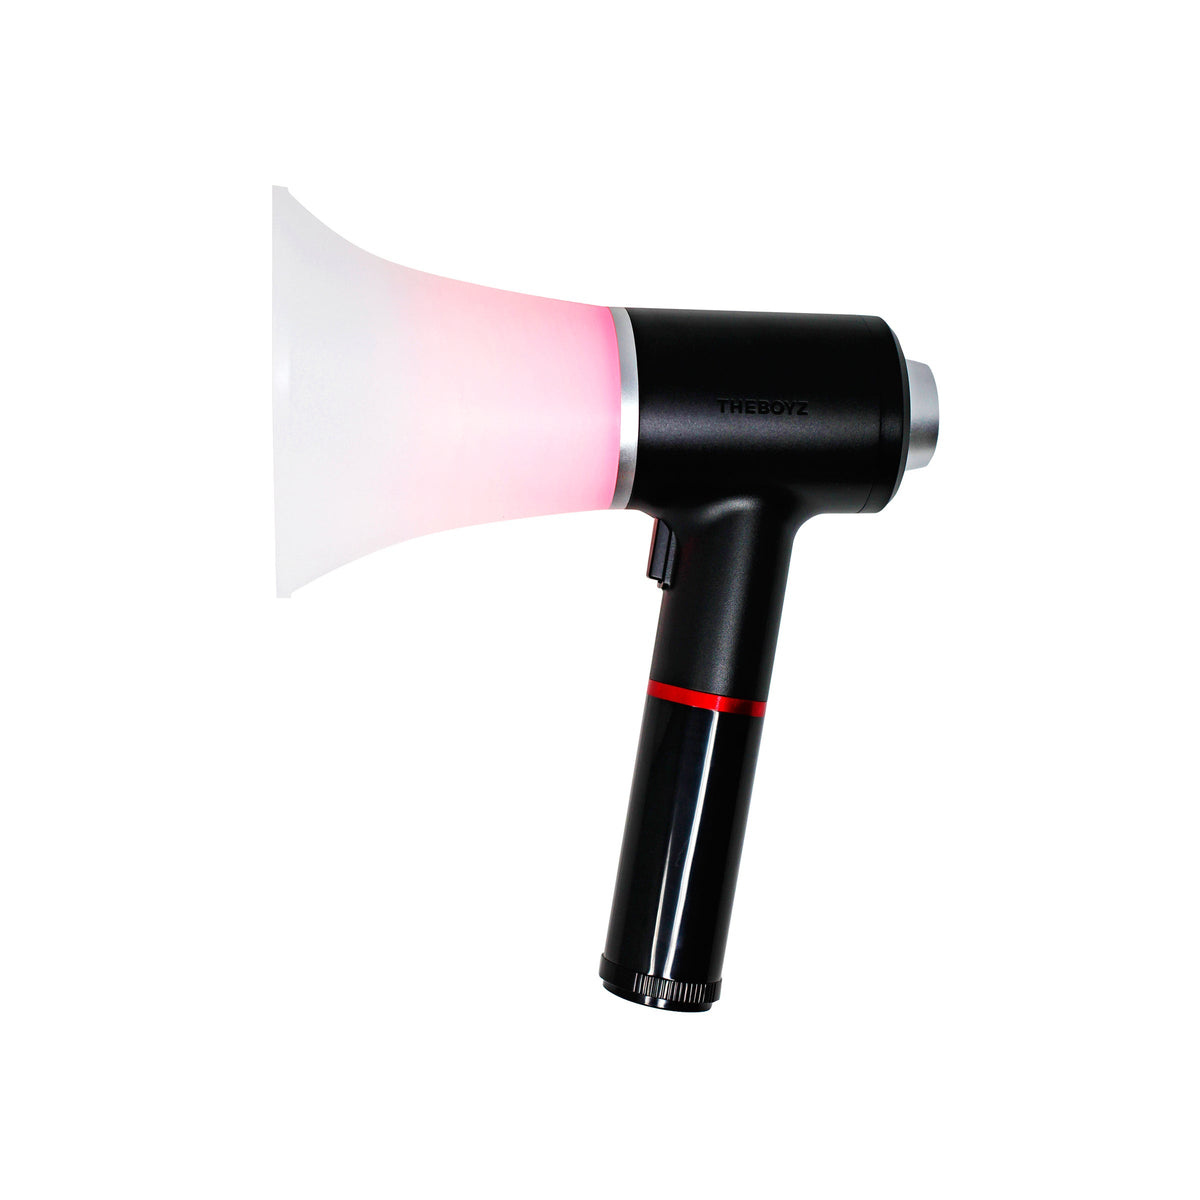 THE BOYZ Official Light Stick Main Product Image 3